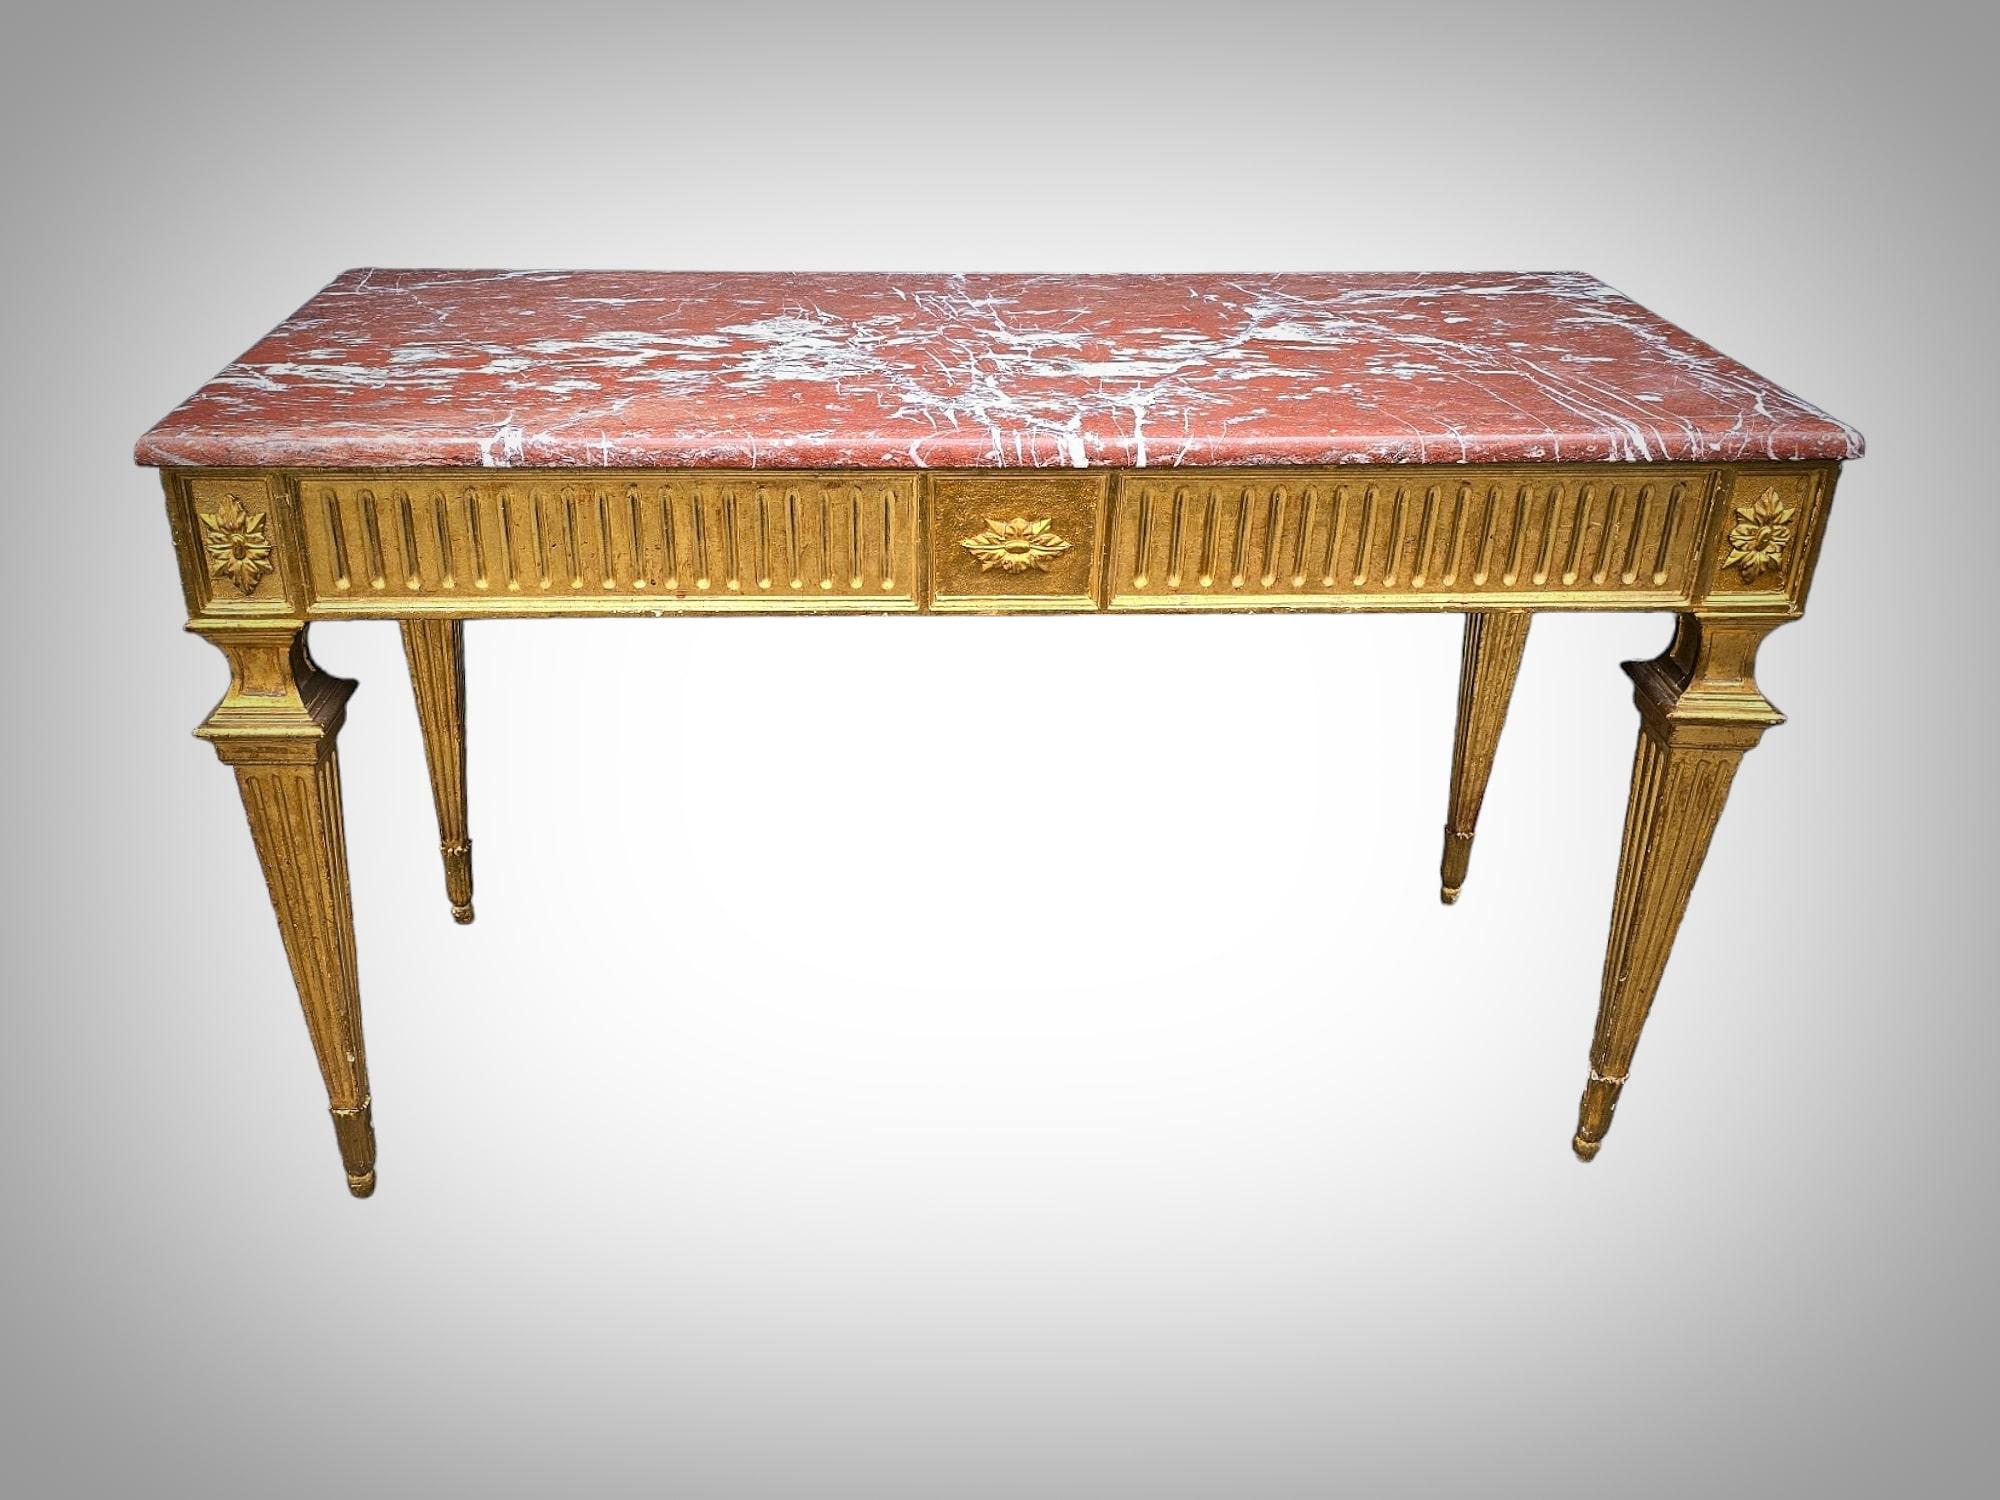 Fruitwood Louis XVI Period Gilded Carved Wood Console Table 18 th For Sale